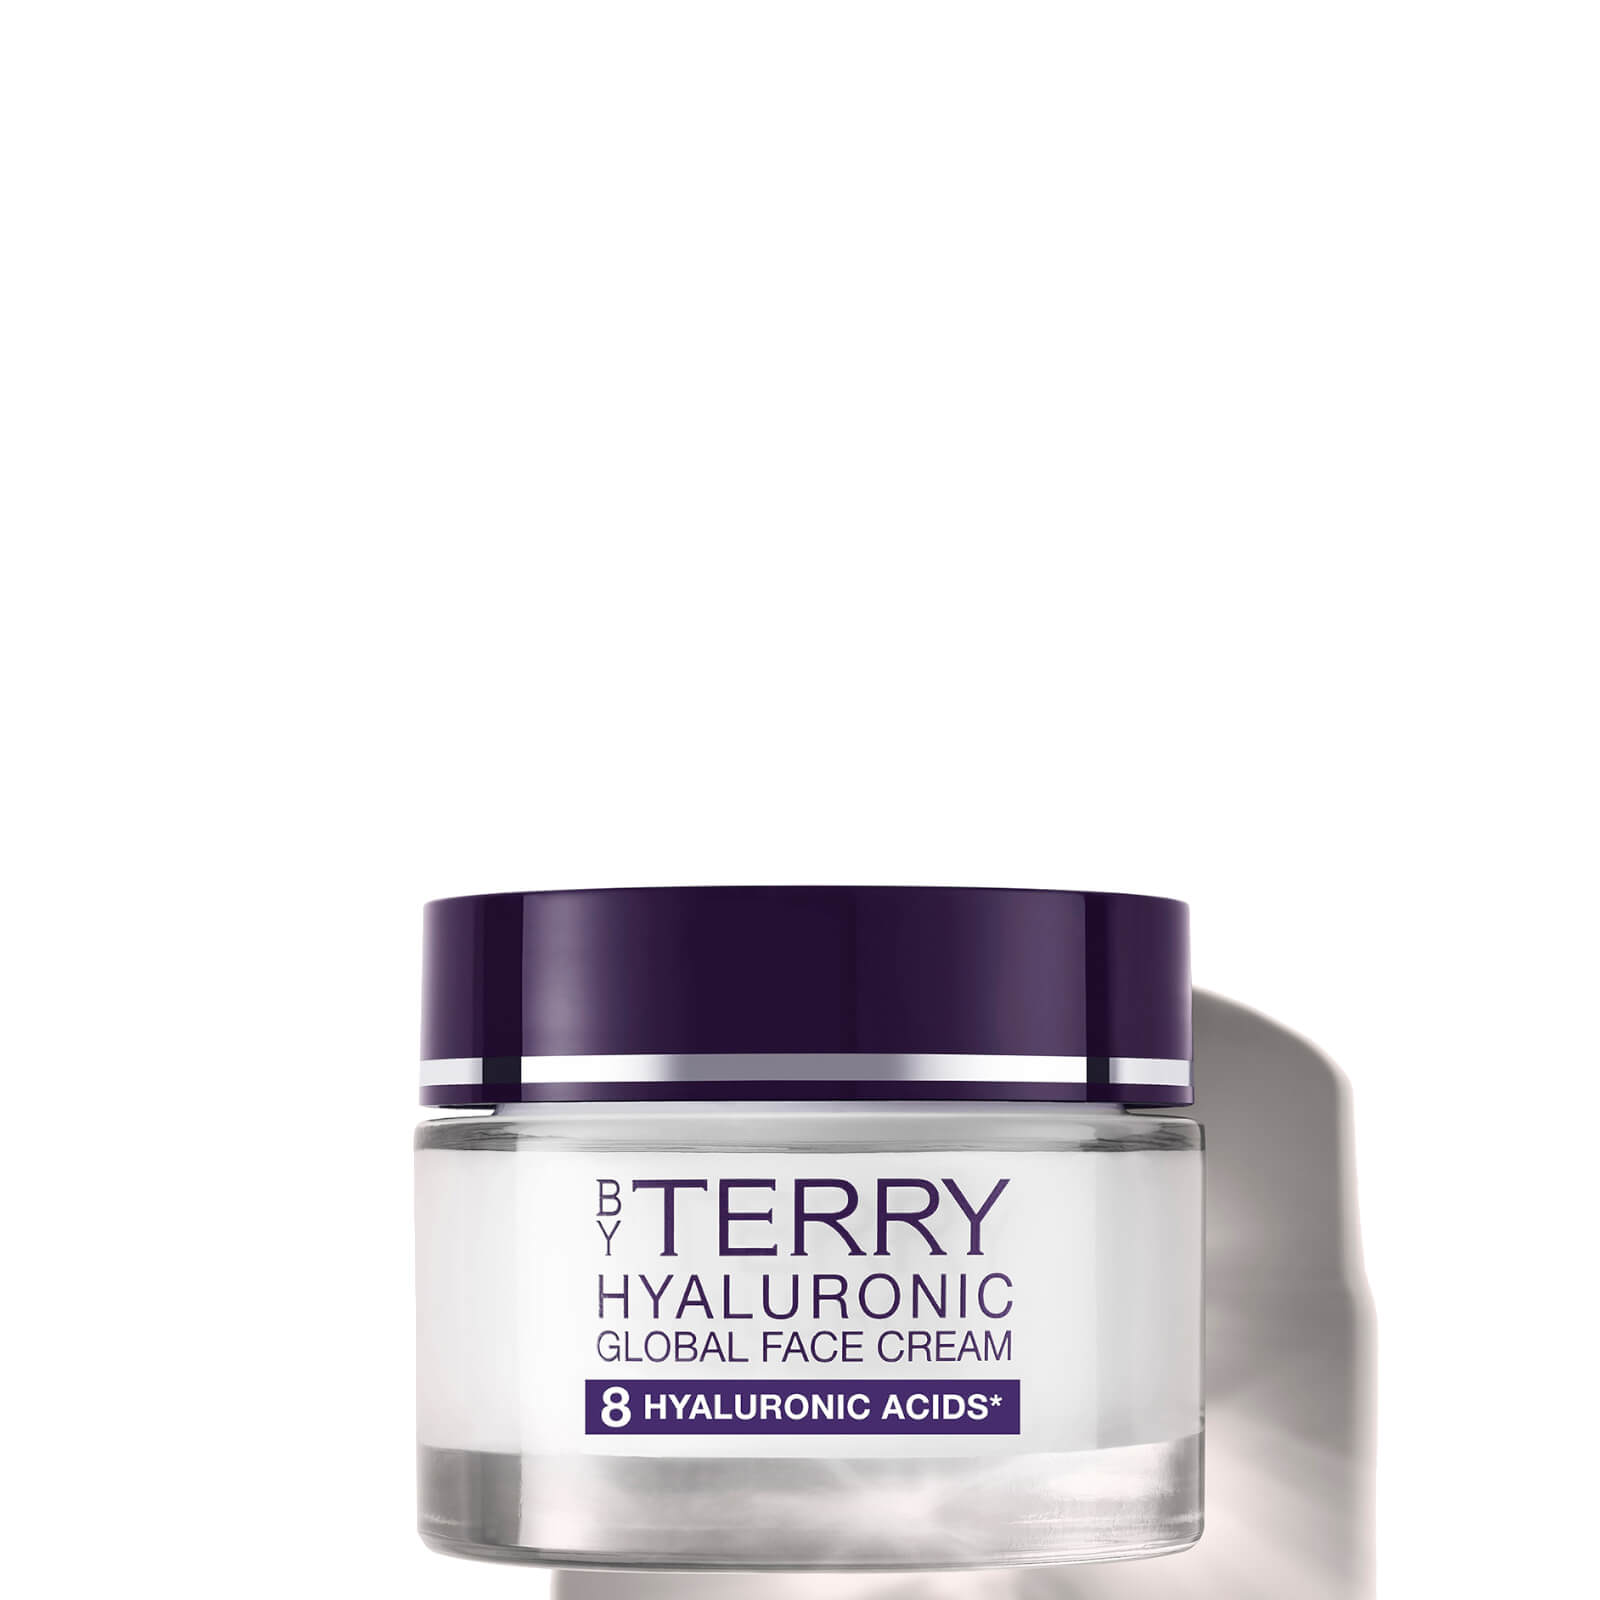 Image of Crema Viso Hyaluronic Global By Terry 50ml